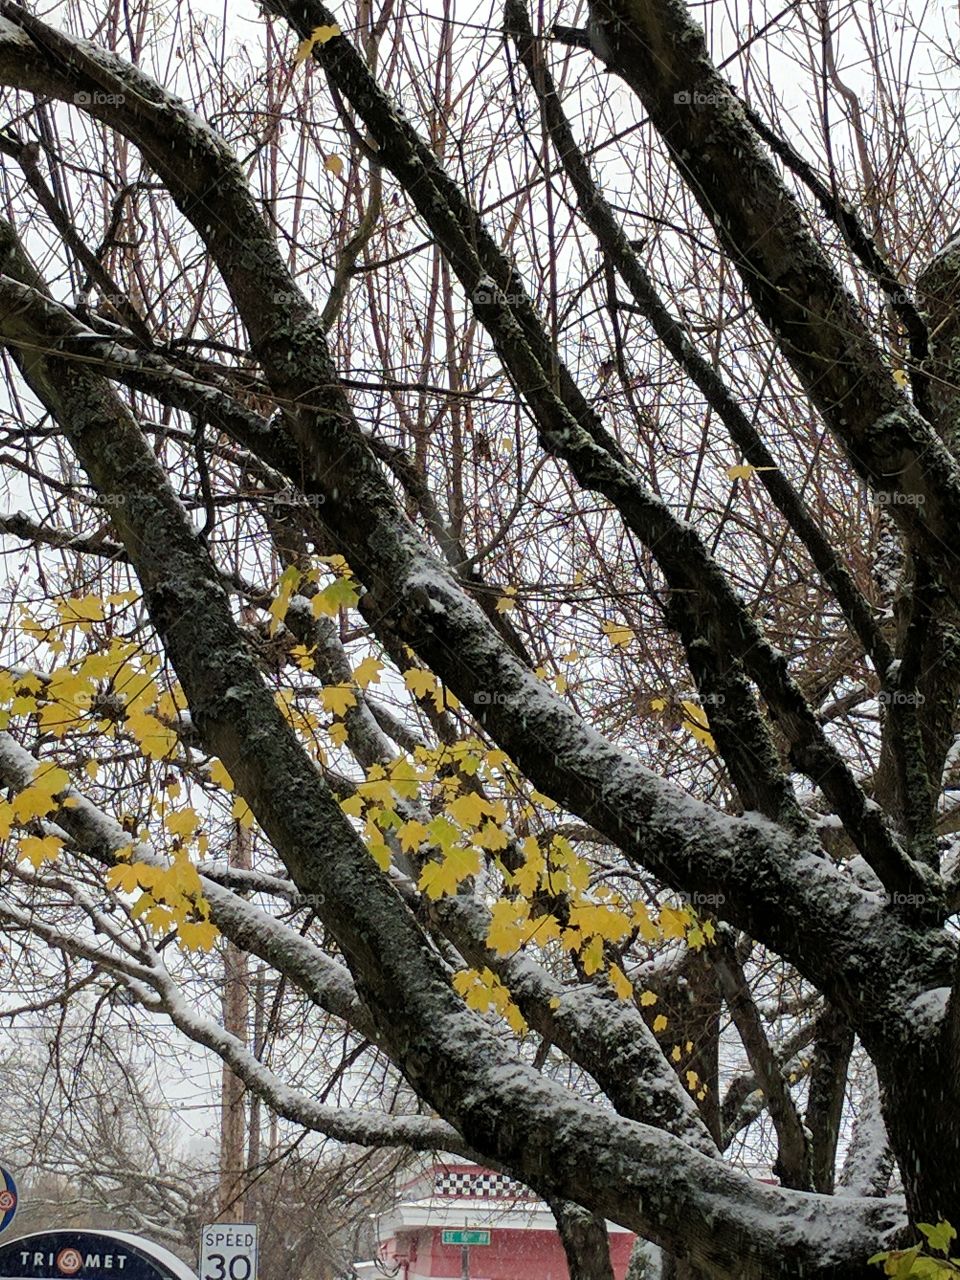 Snowy Tree Branches with Leaves